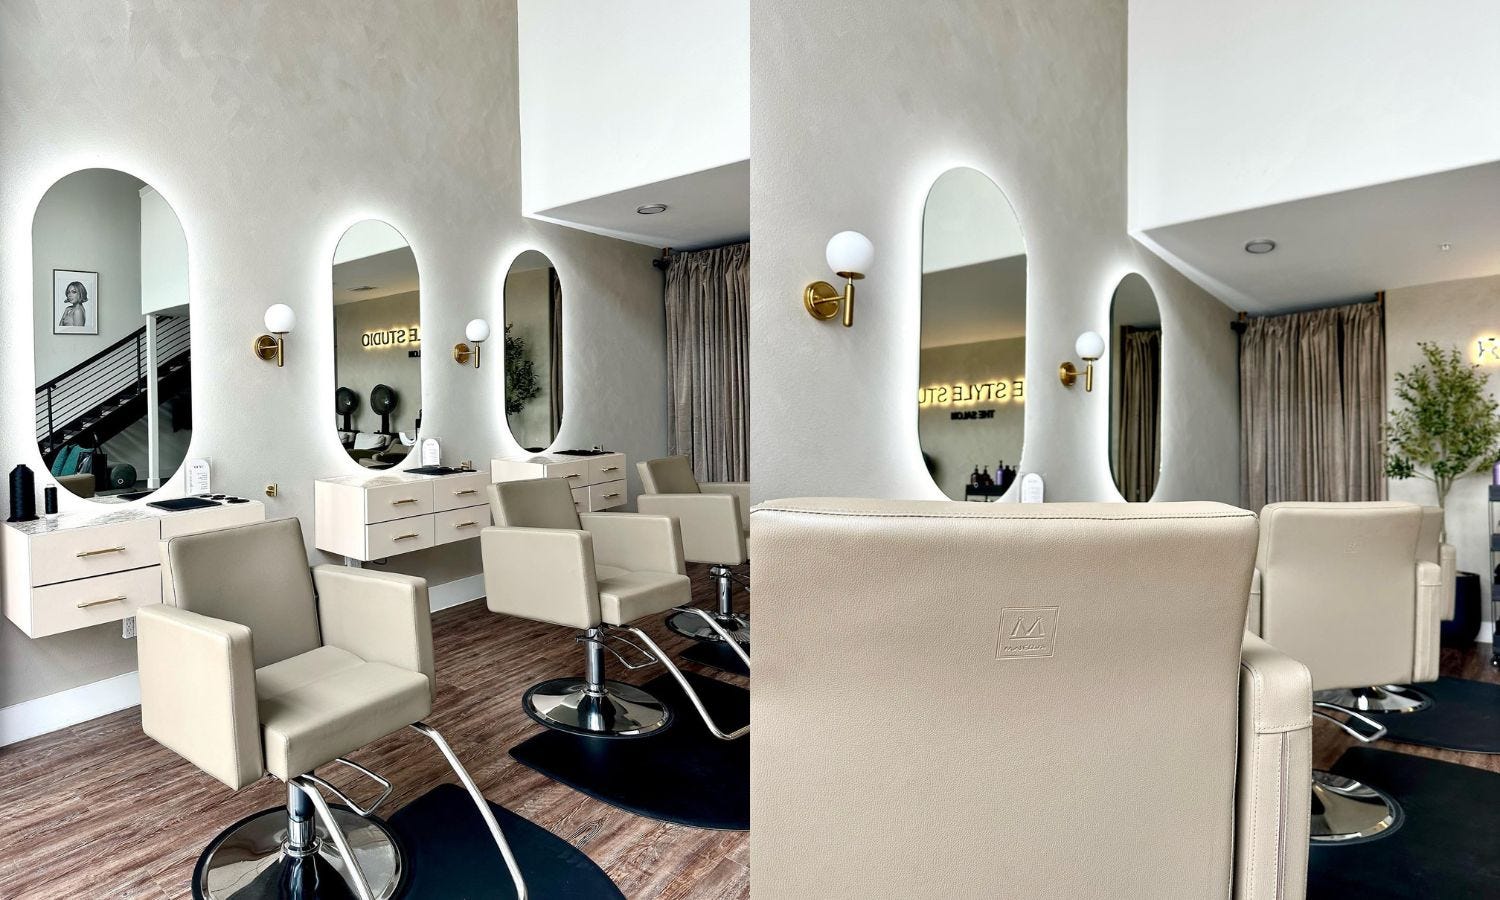 hair salon interior with beige chairs, oval mirrors and wall-mounted styling stations